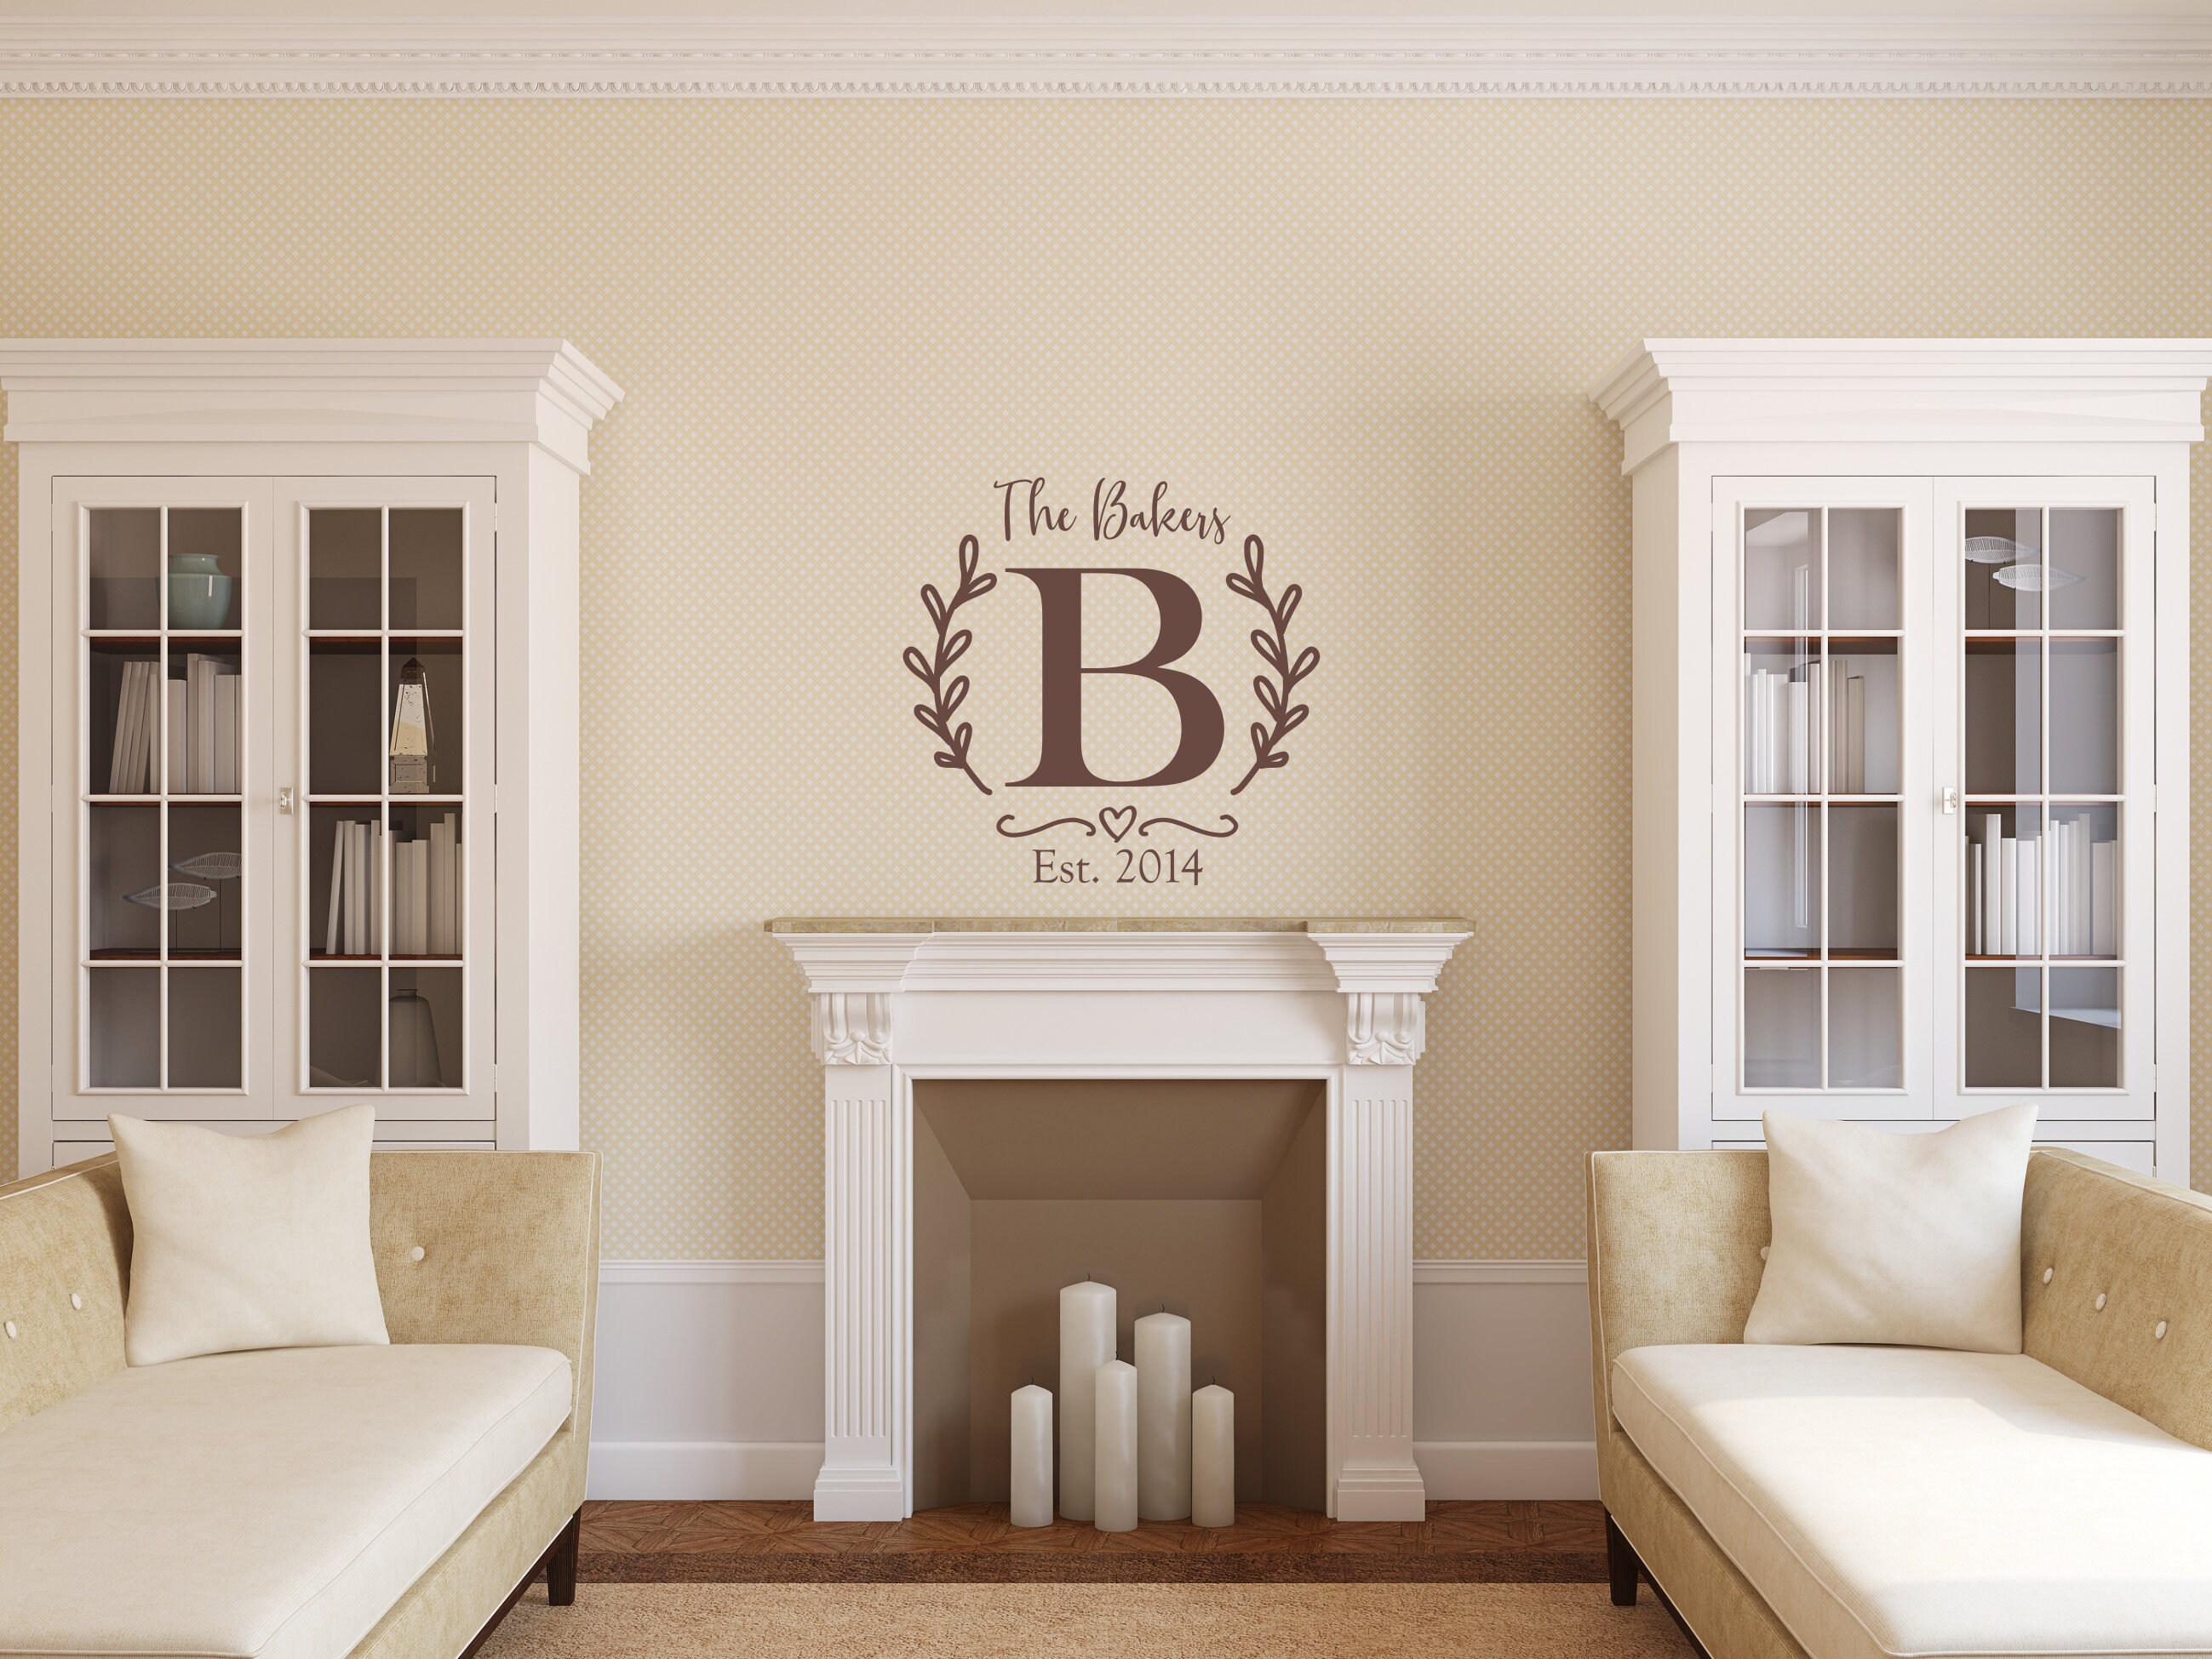 Bedroom wall decal Established date with last name and Initial Personalised wall decal monogram Living room wall decal